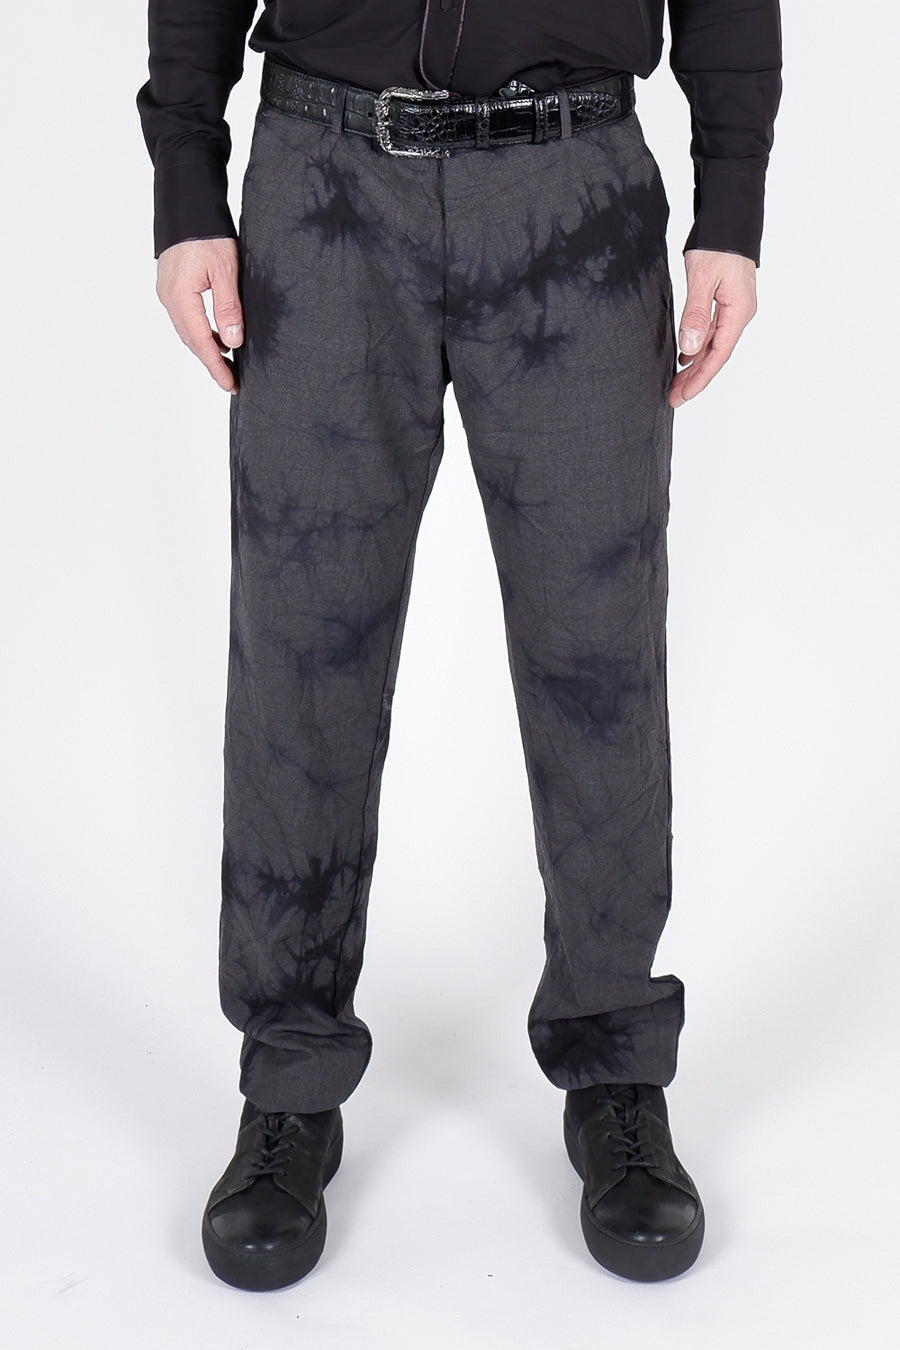 Buy the PT Torino Distressed Cotton Trousers With Feather Grey/Black at Intro. Spend £50 for free UK delivery. Official stockists. We ship worldwide.